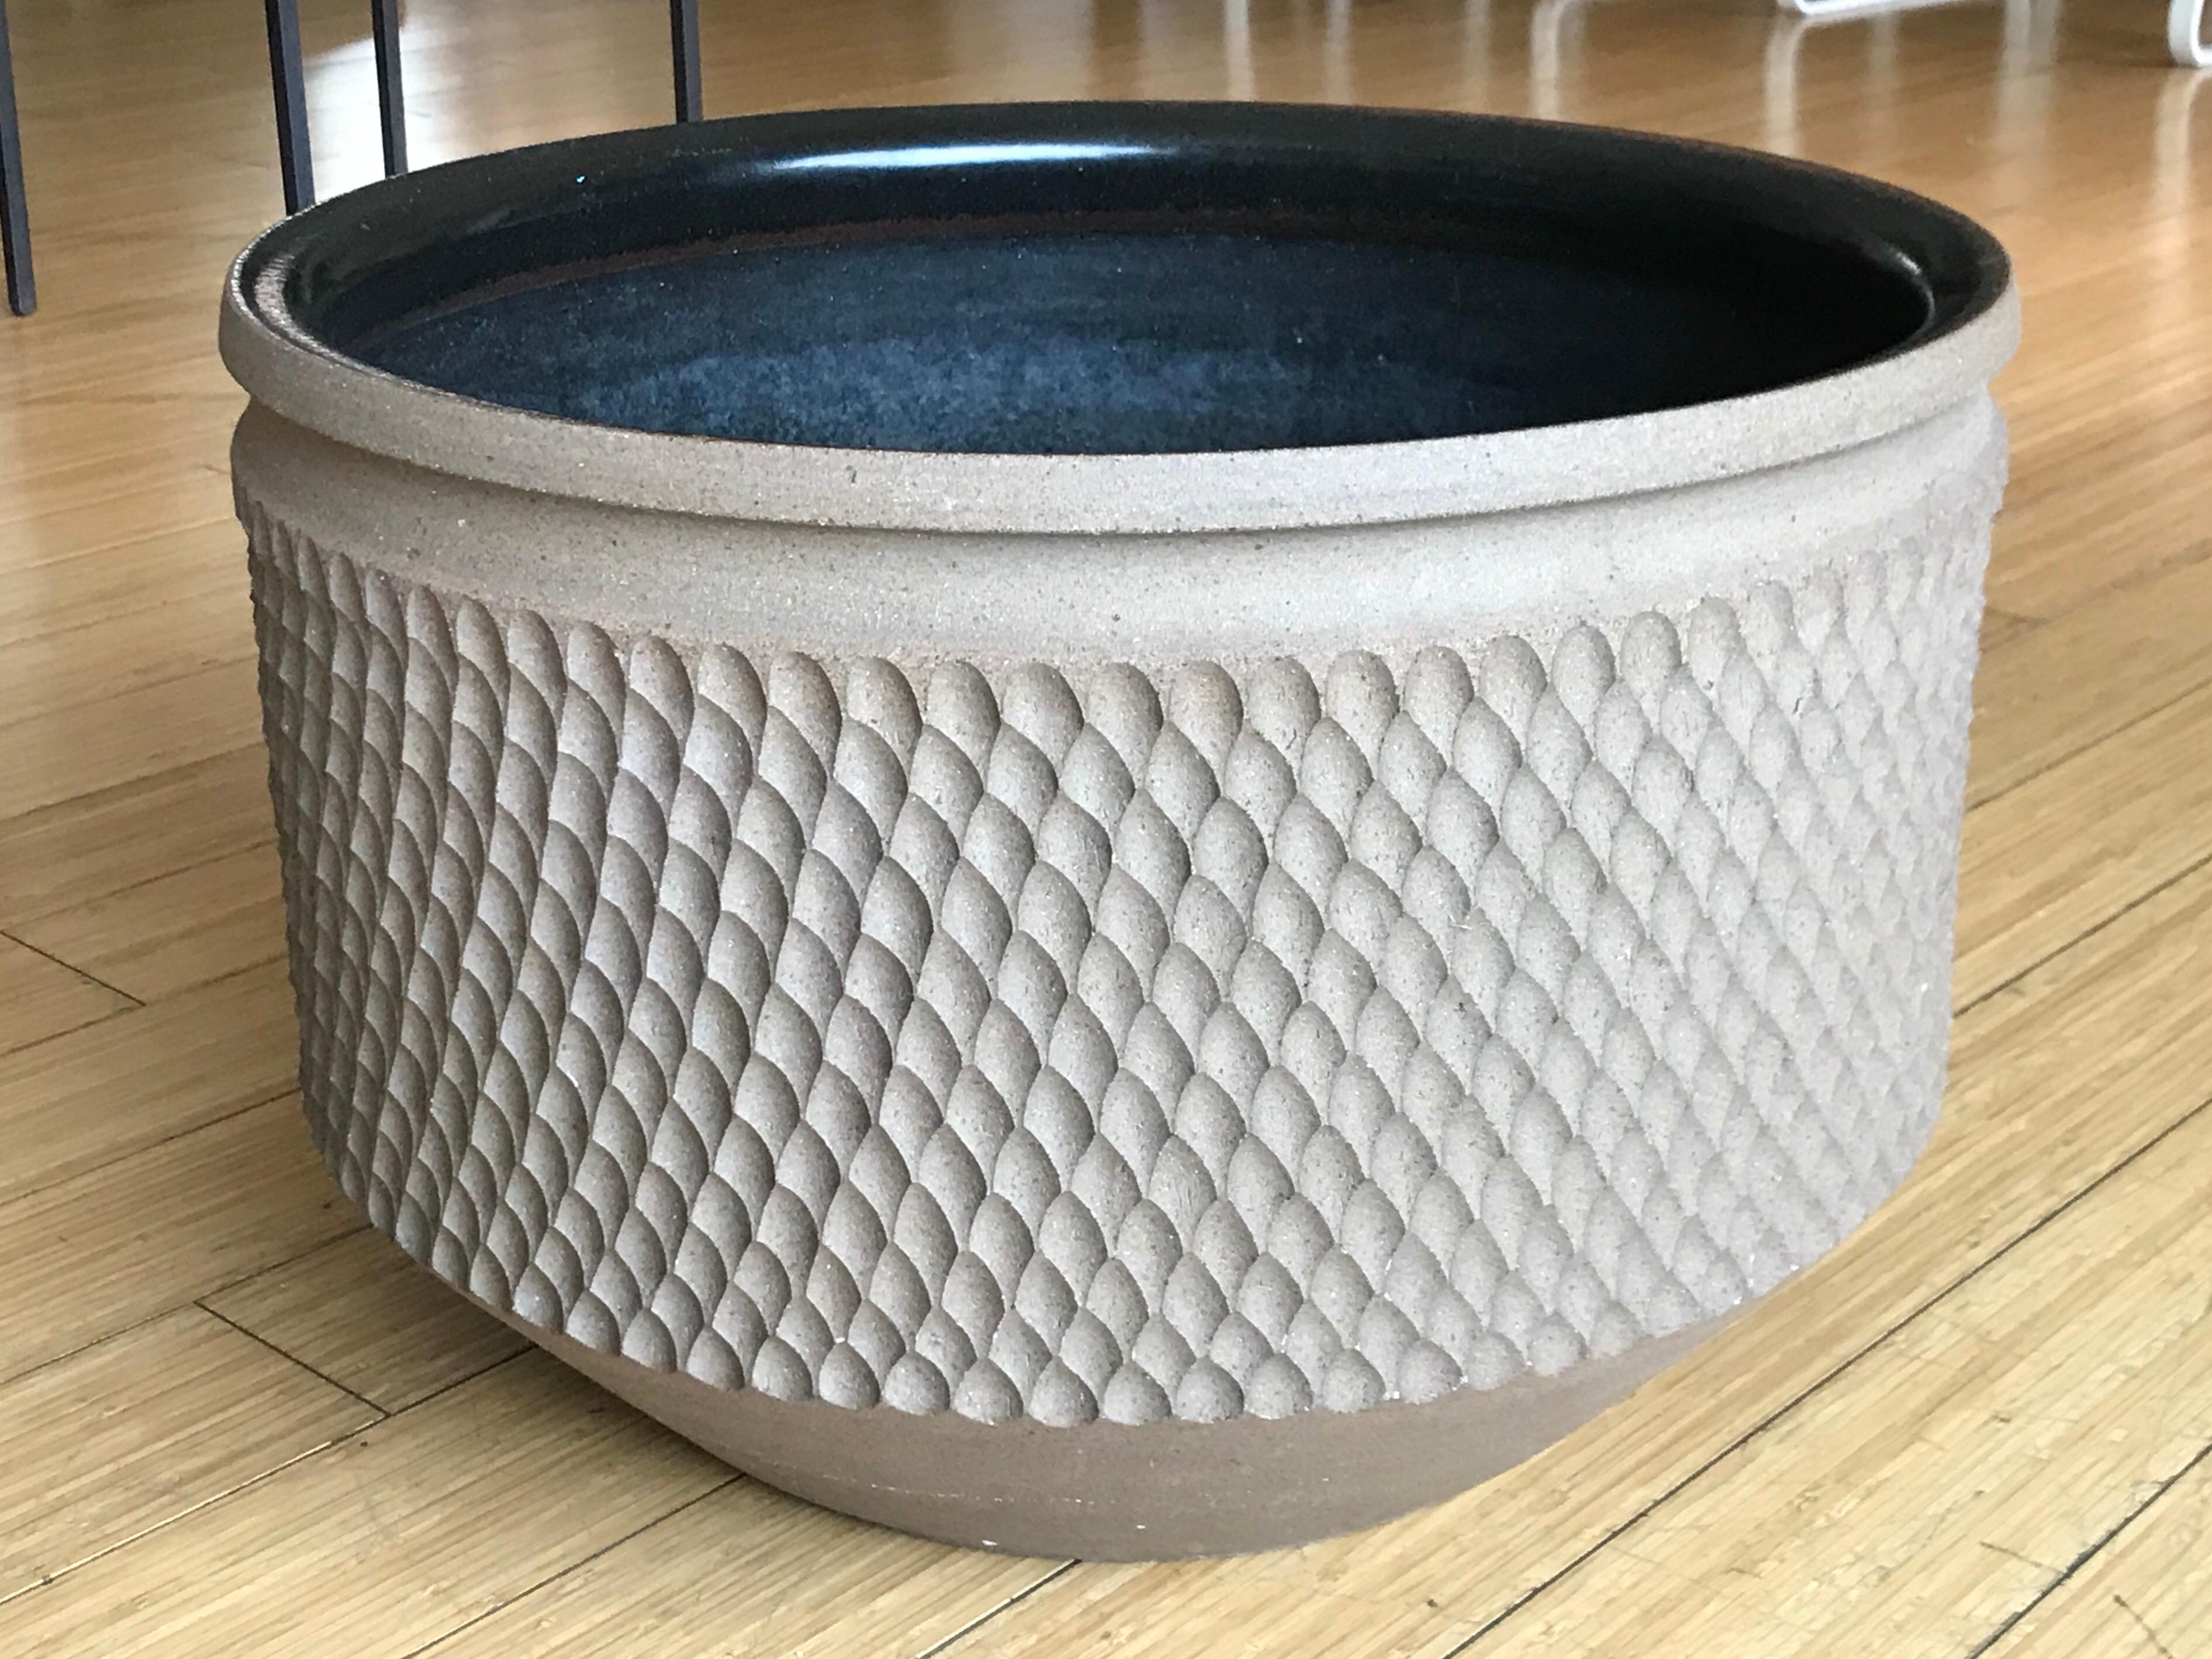 A great California design.
hand tooled pattern design on natural stoneware on the outside with black glaze on the inside
one or two minor chips, water drain holes and a tight hairline crack on the rim
other than that, it's in fine decorative